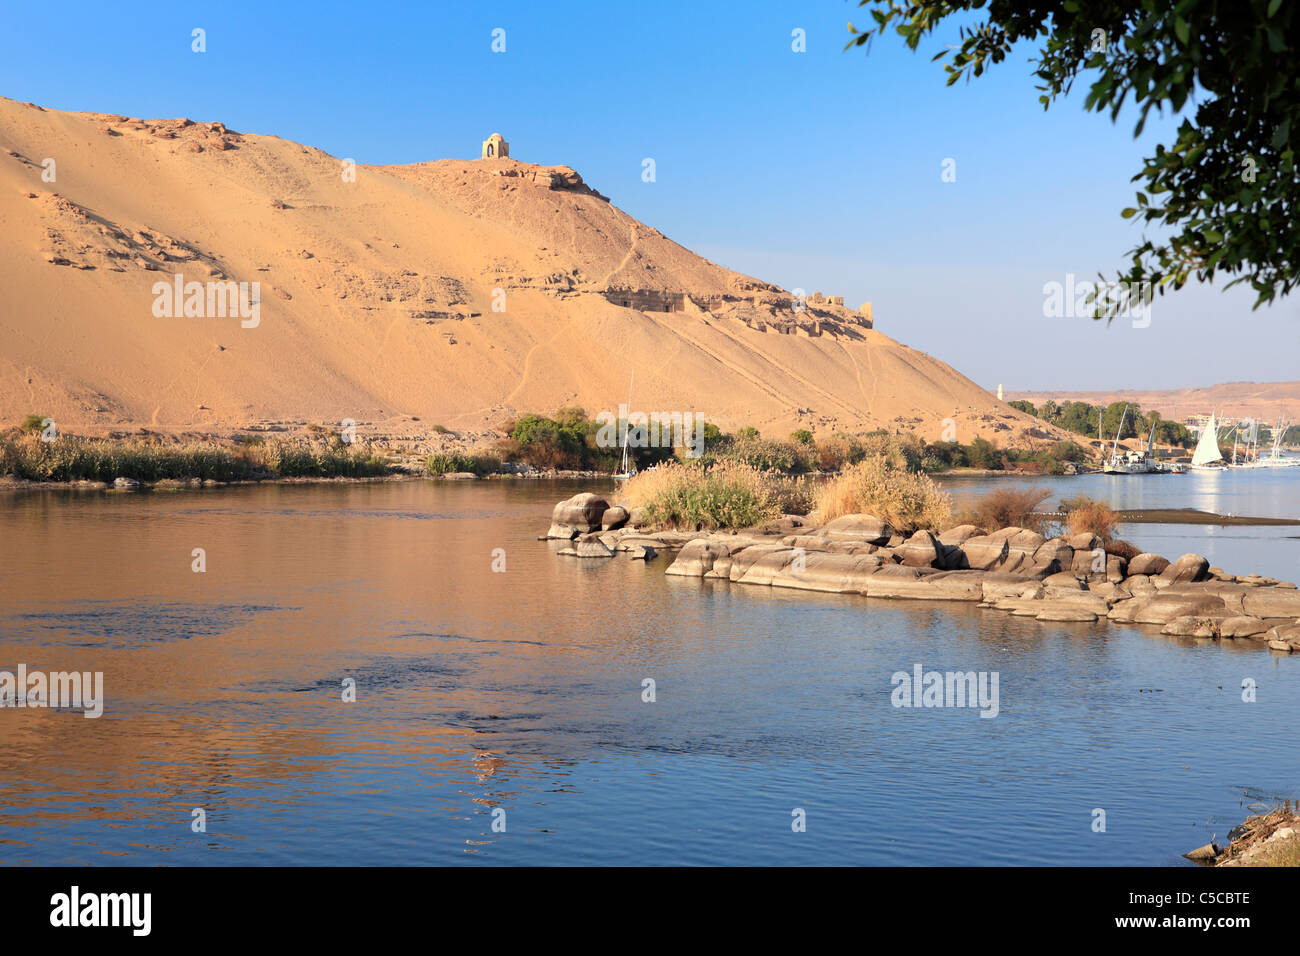 Desert on the Western bank of the Nile, view from Kitchener island, Aswan, Egypt Stock Photo